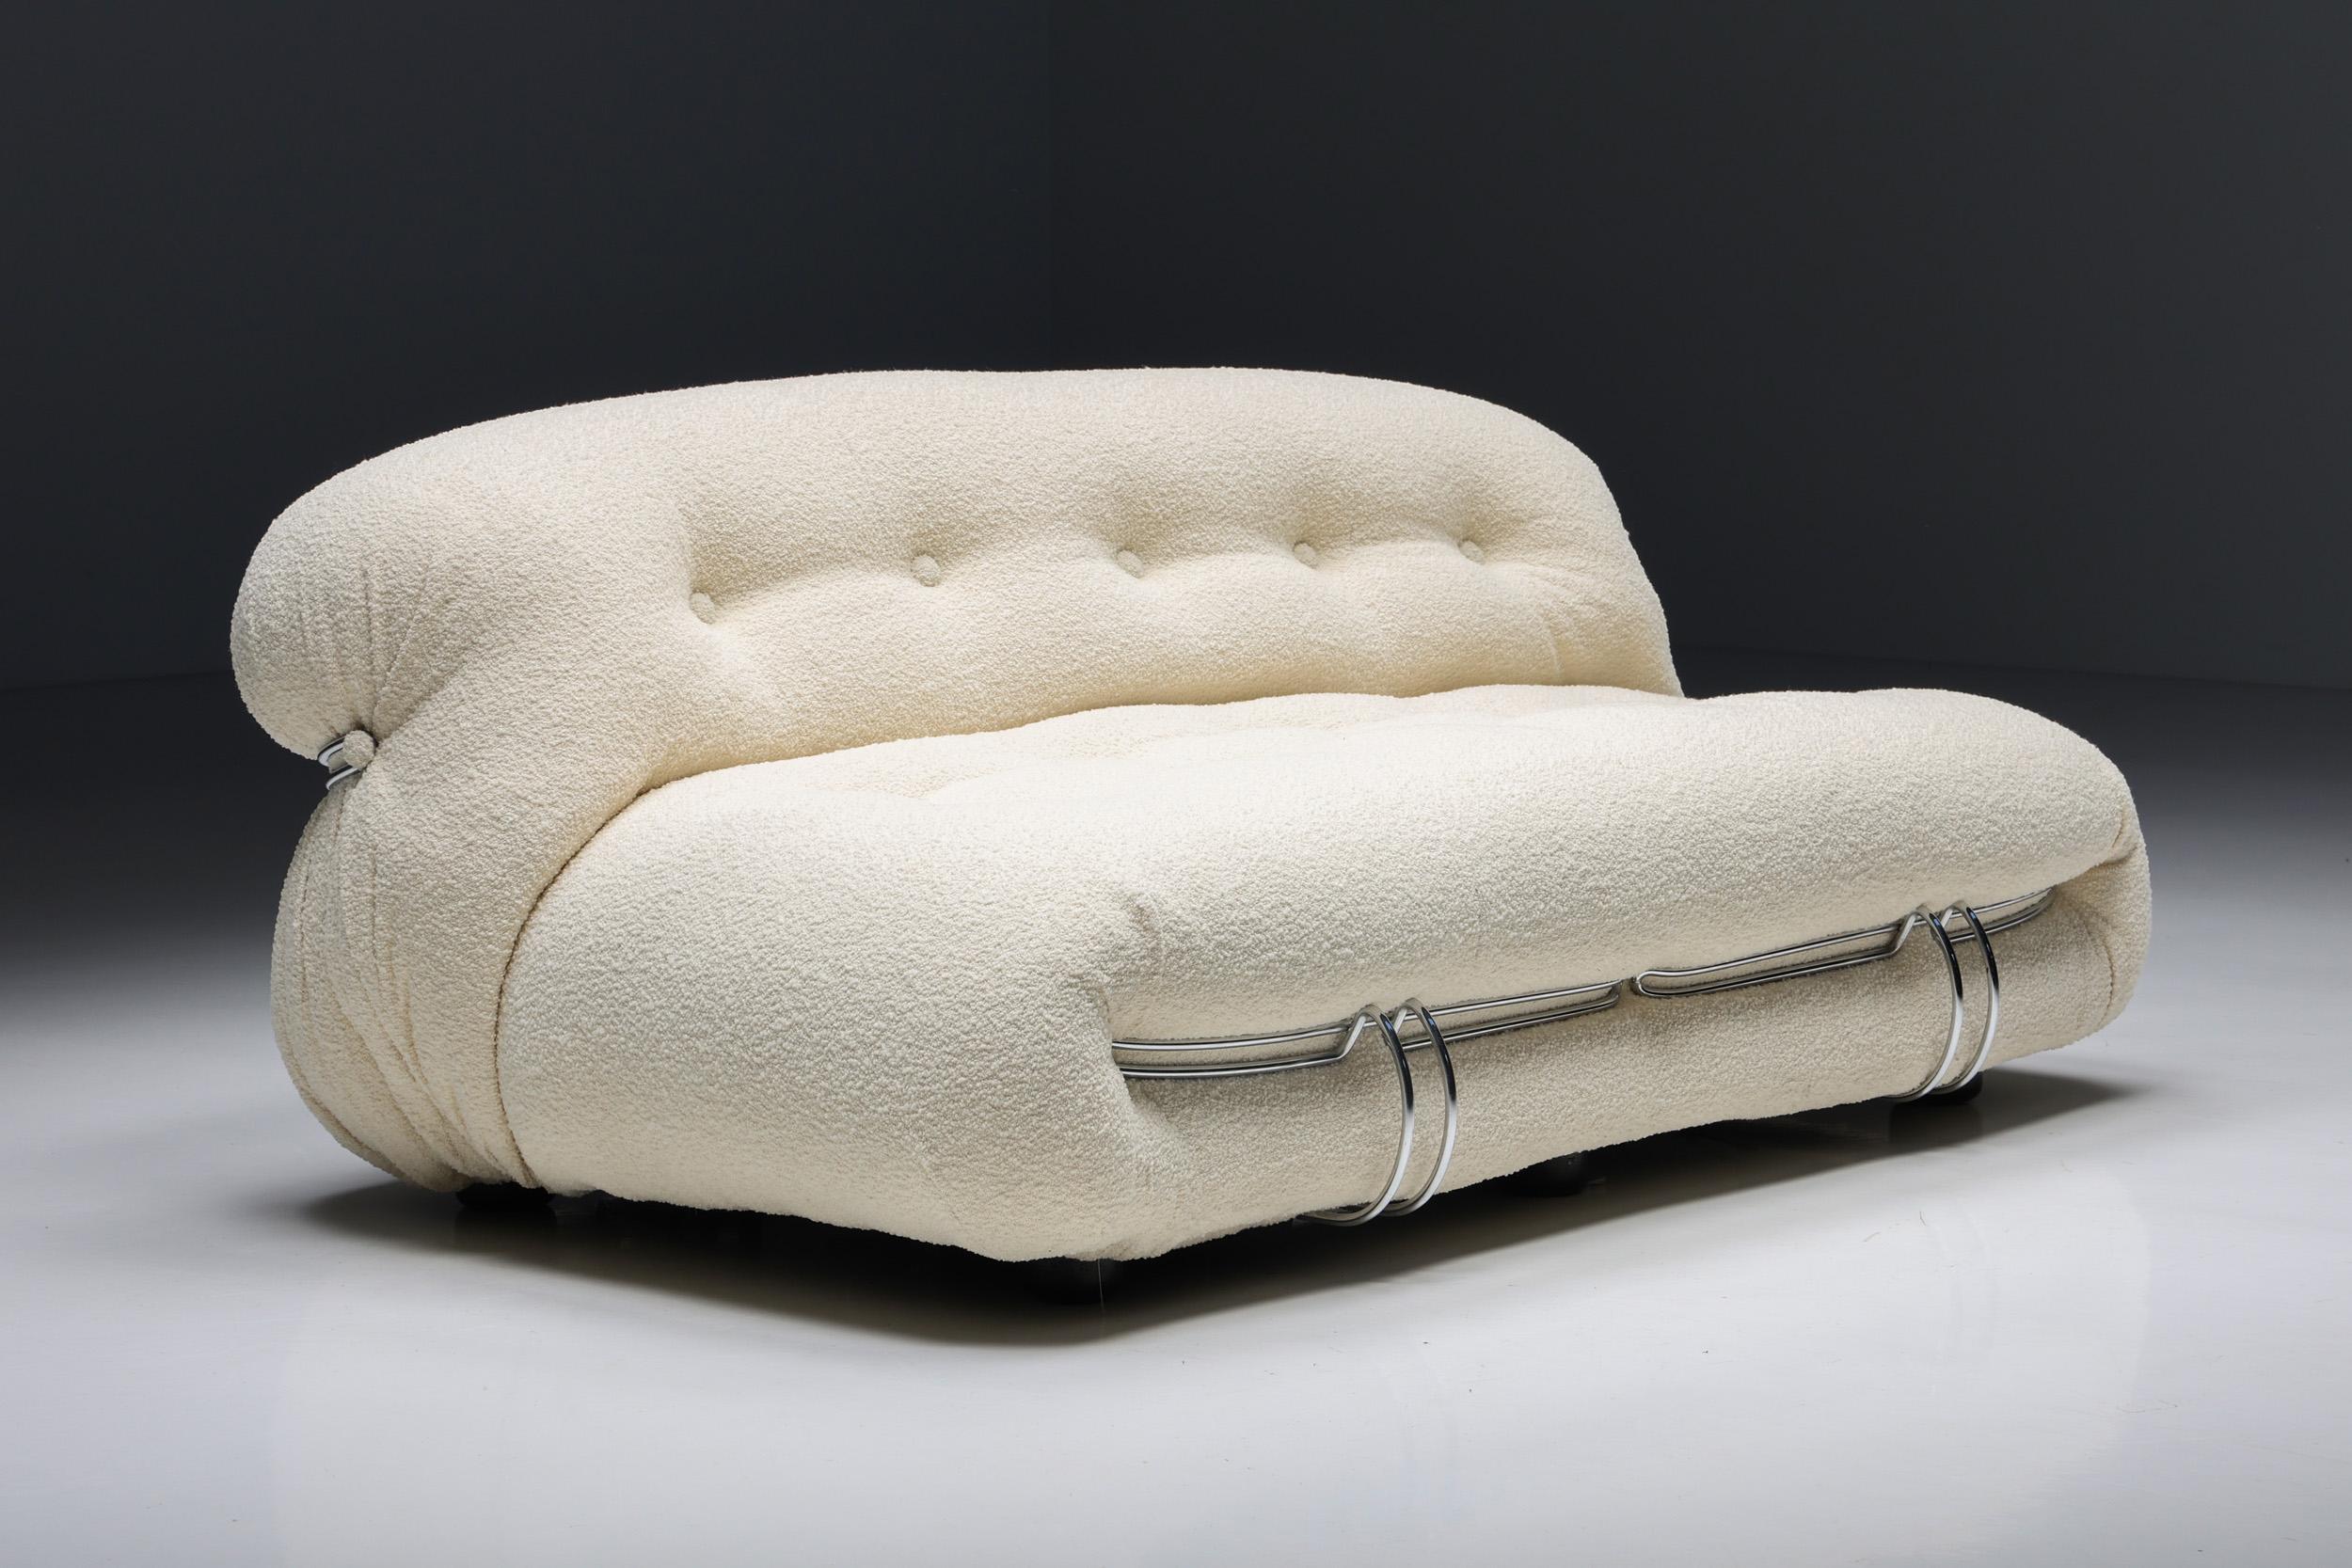 Scarpa; Afra & Tobia Scarpa; Soriana Sofa; Two-Seater; Cassina; Bouclé Wool; Italy; Italian Design; 1970s; Mid-Century Modern;

This Soriana two-seater sofa, reupholstered in bouclé wool, was designed by Afra & Tobia Scarpa and manufactured by